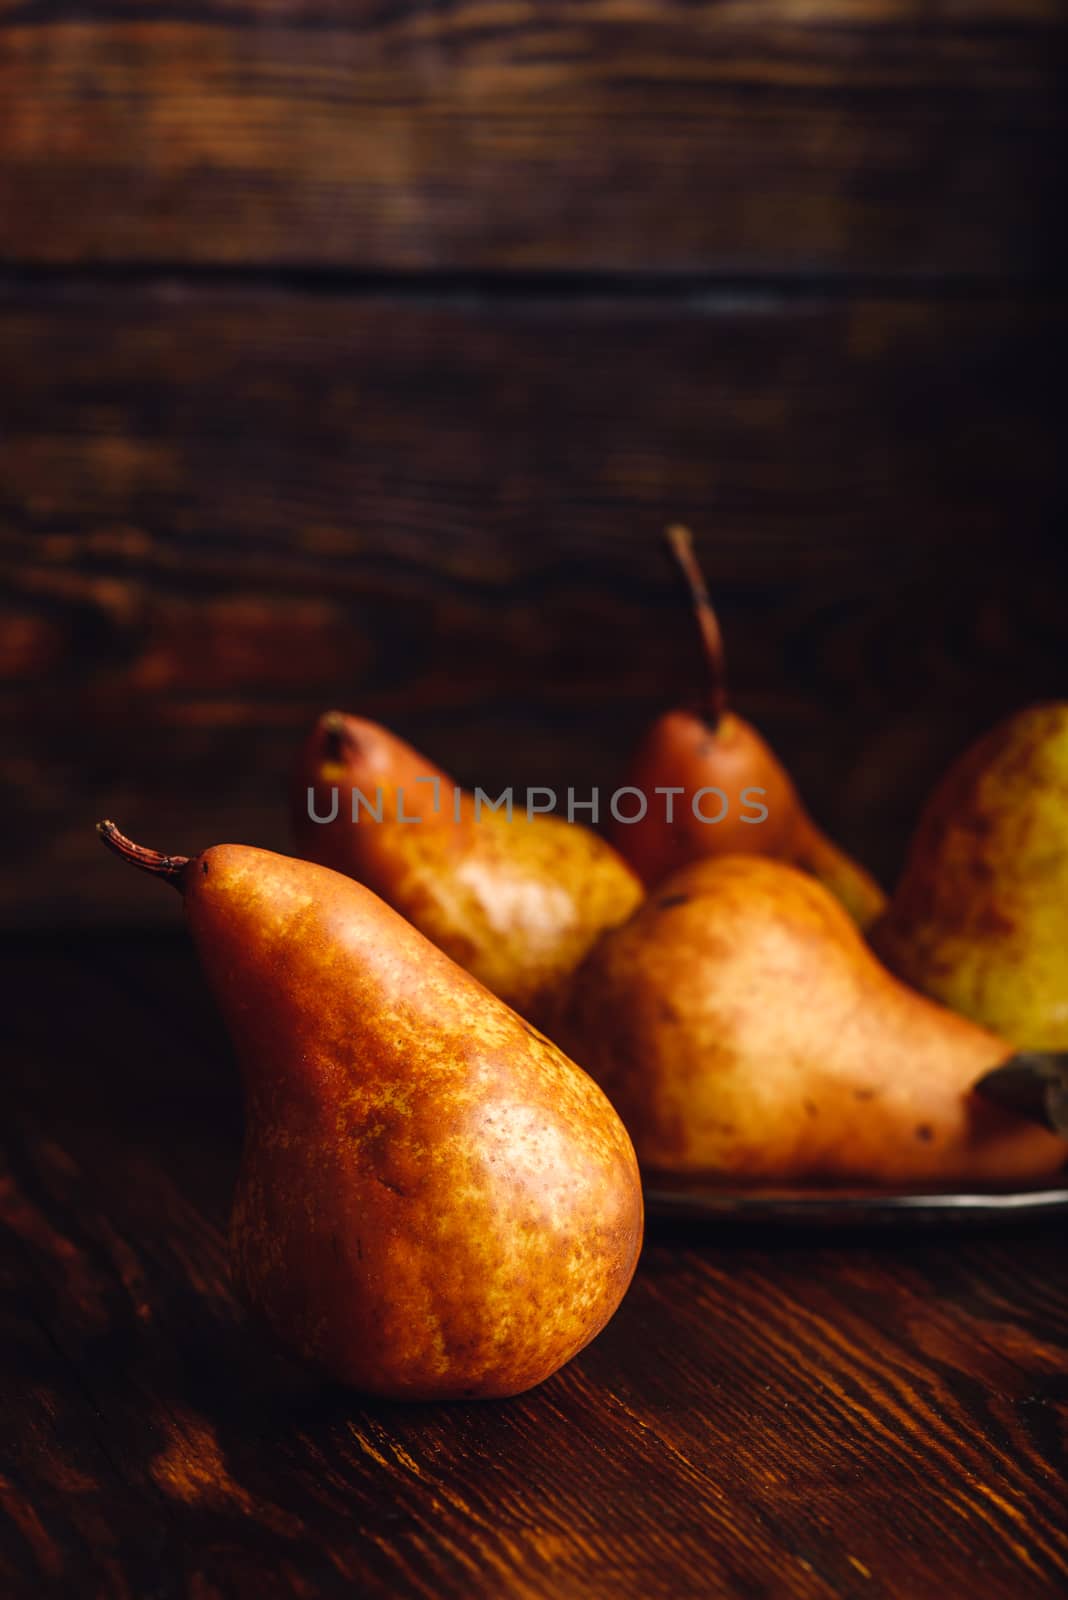 Golden Pear on Wooden Table and Few Pears on Backdrop. Vertical Orientation.